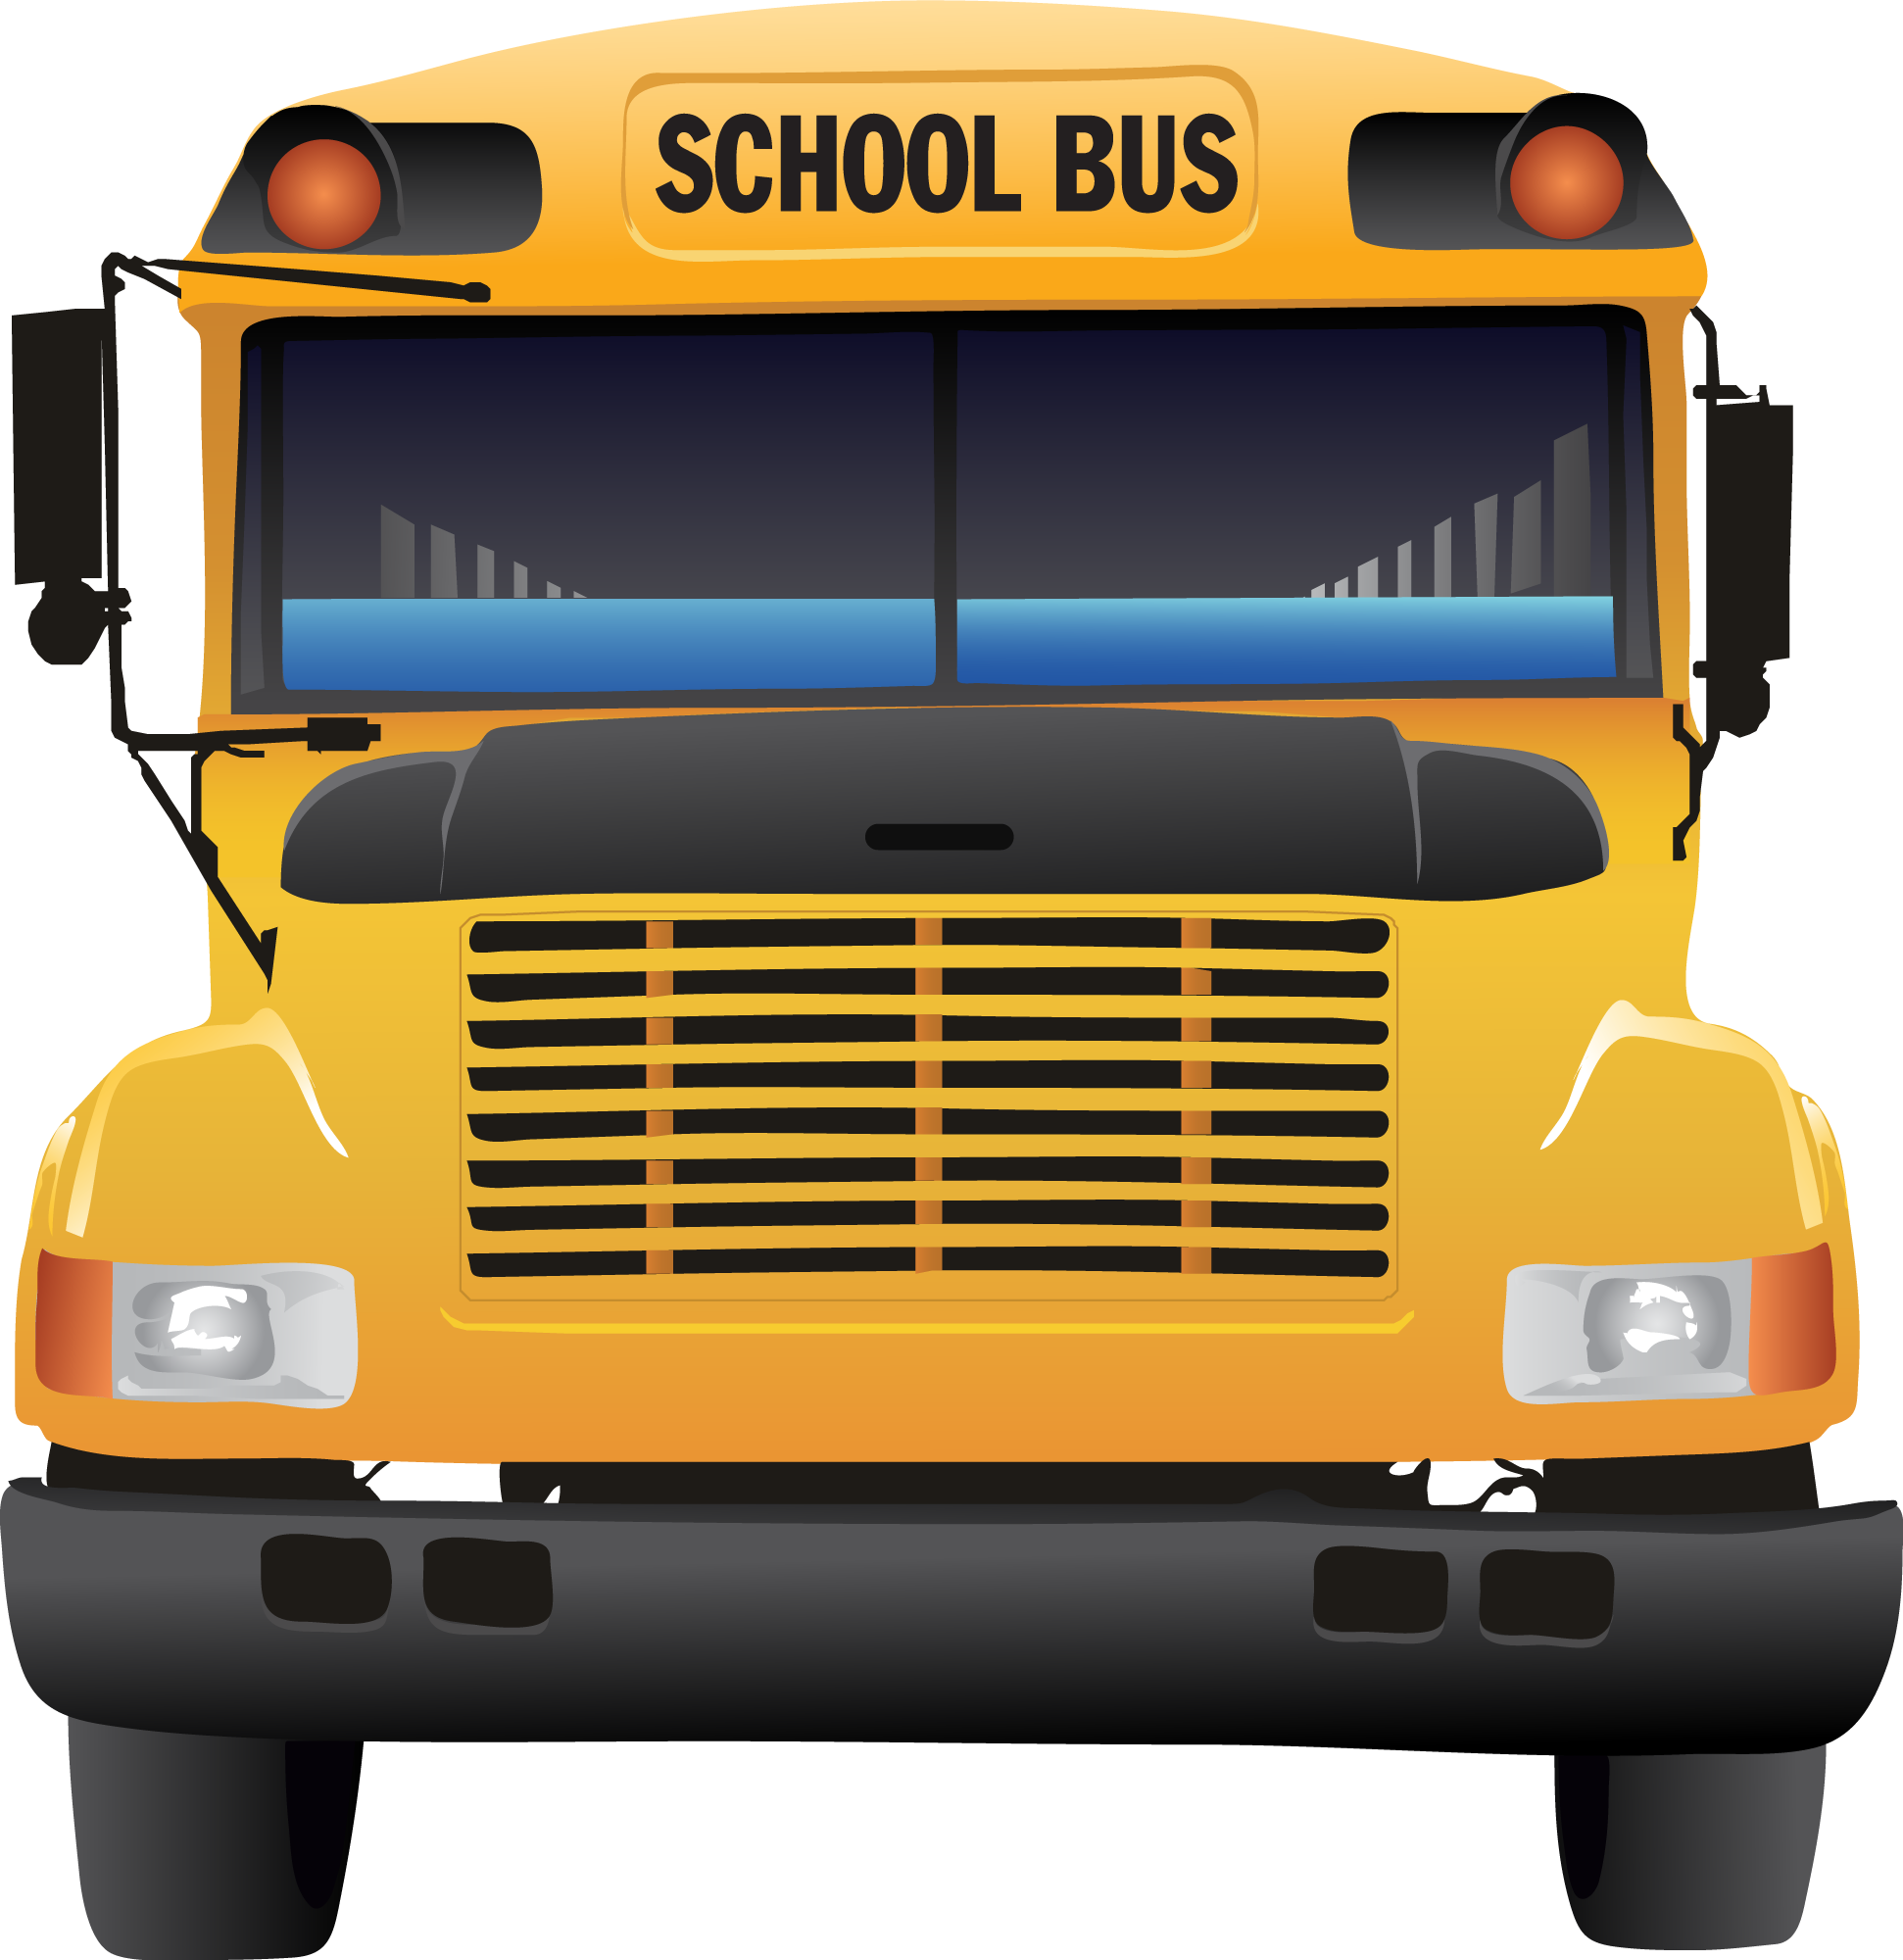 free clipart of a school bus - photo #4